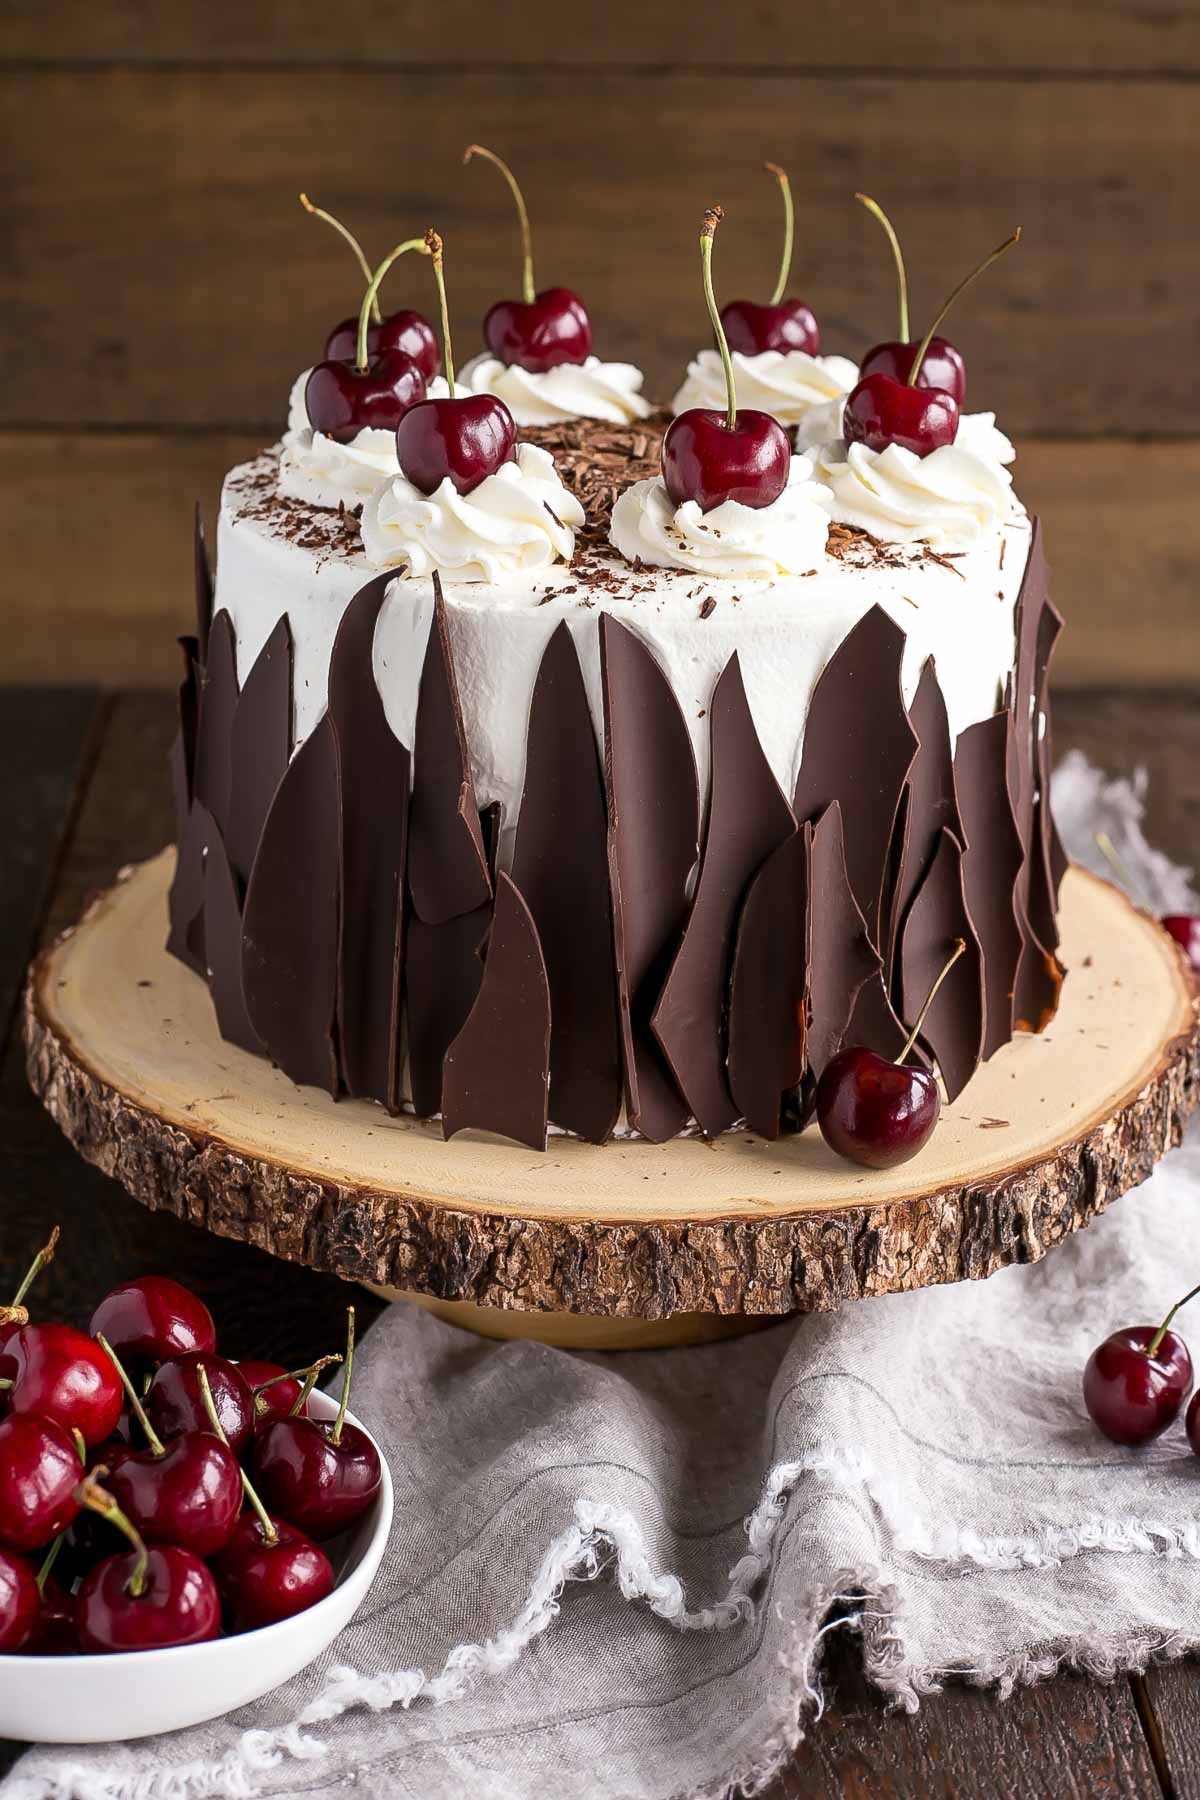 traditional black forest cake recipe